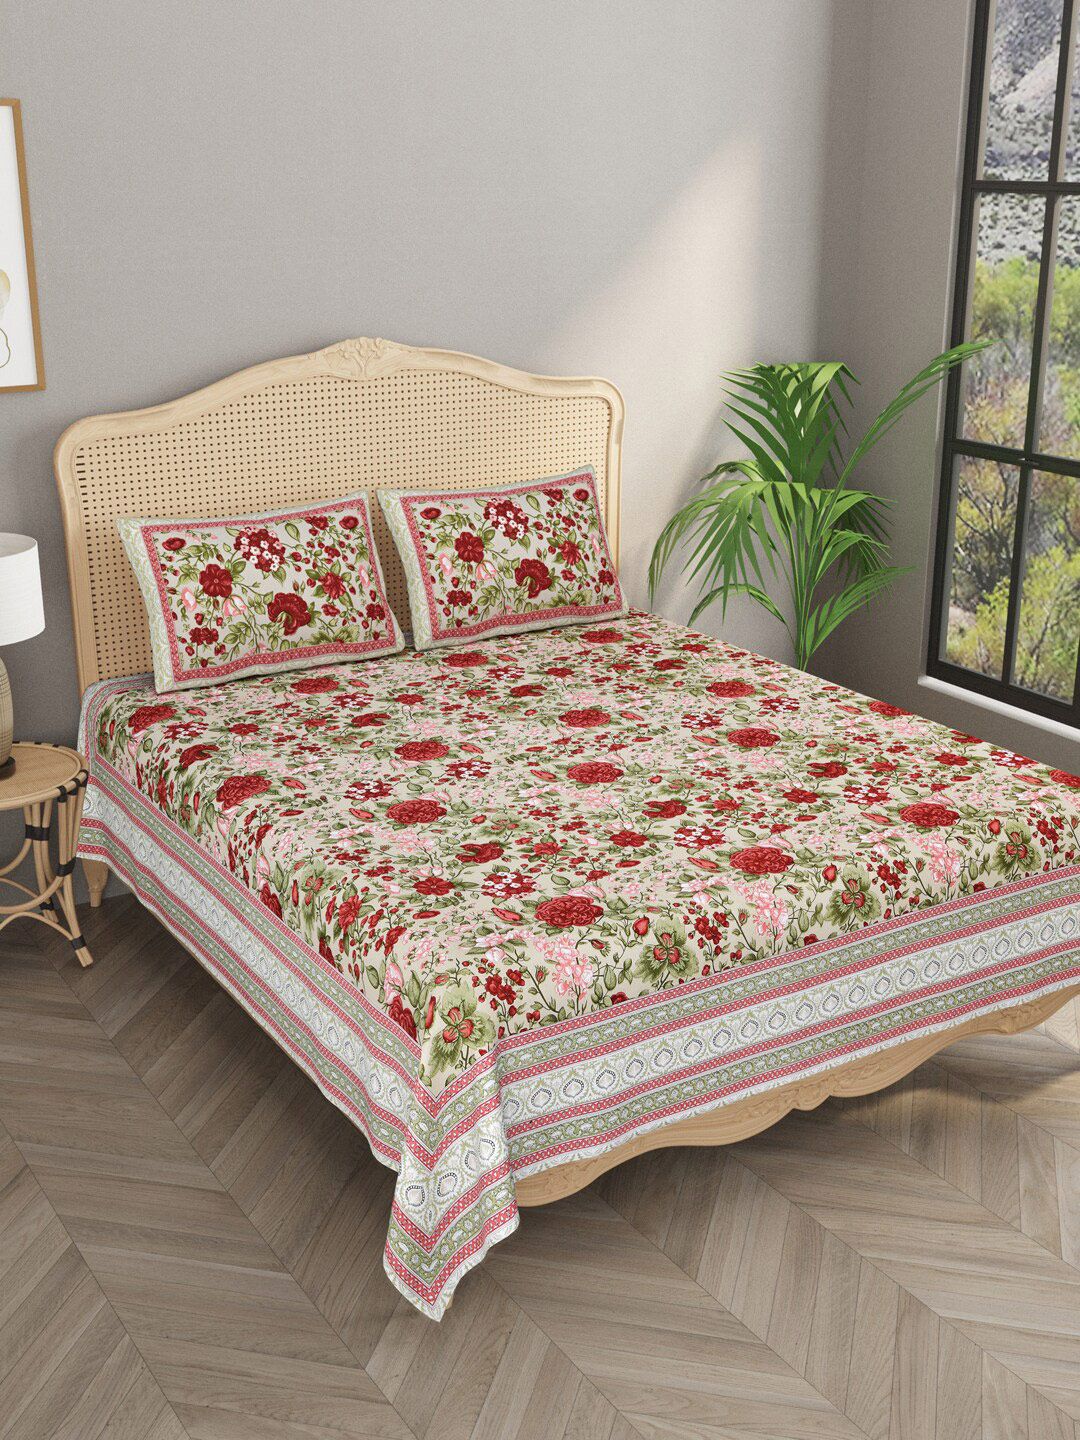 Gulaab Jaipur Maroon & Green Floral 400 TC King Bedsheet with 2 Pillow Covers Price in India